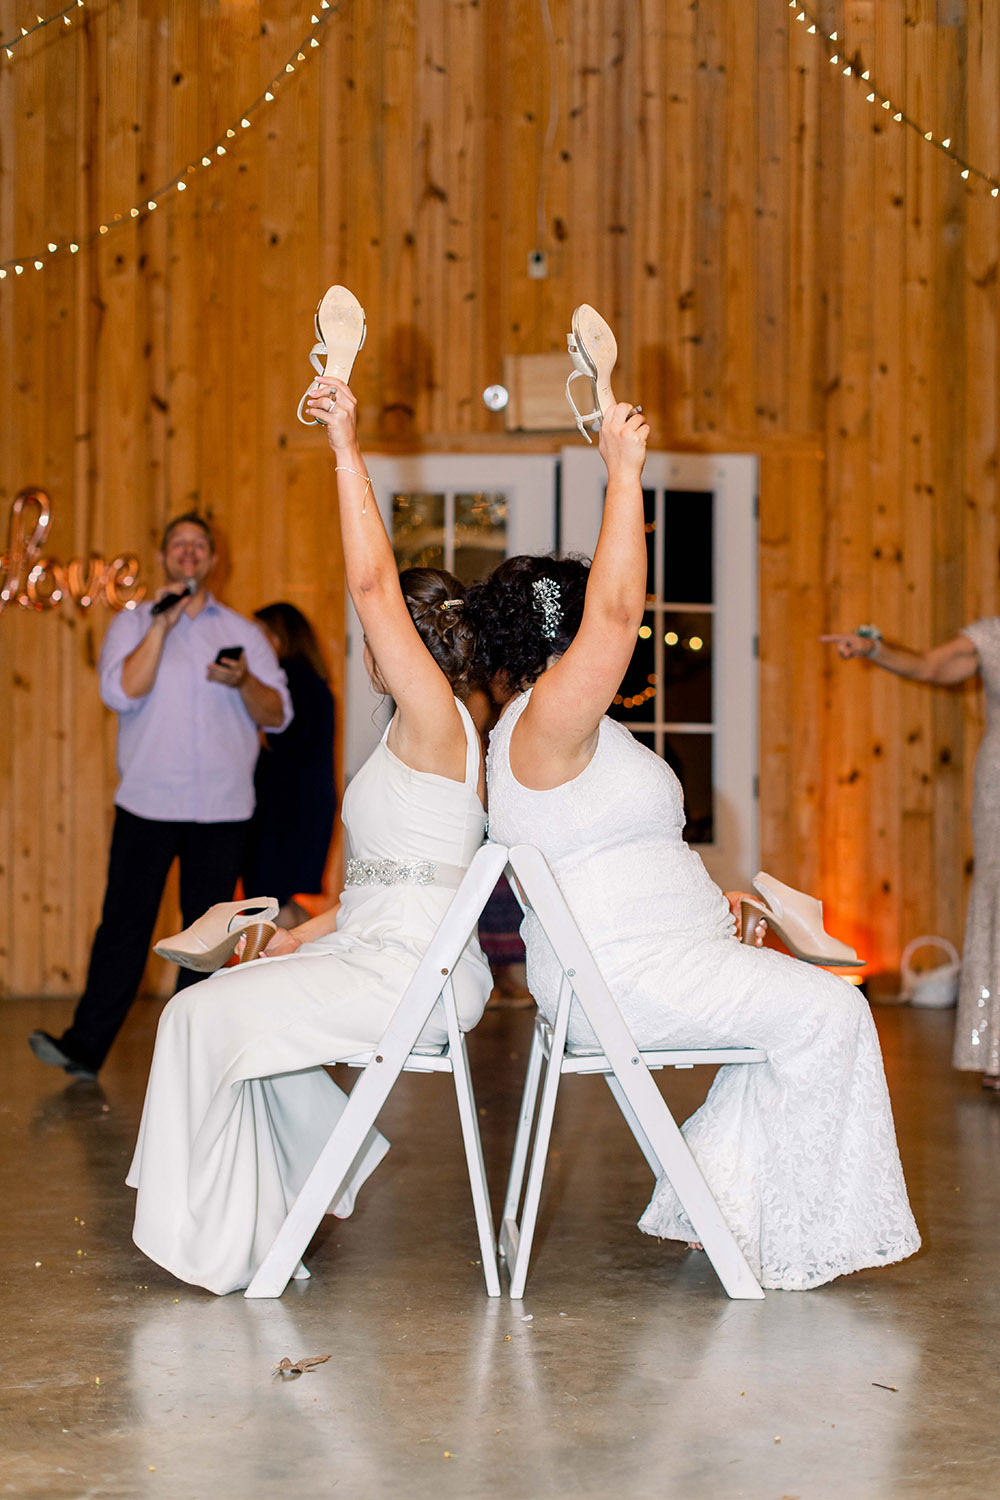 the brides play the shoe game at the wedding reception